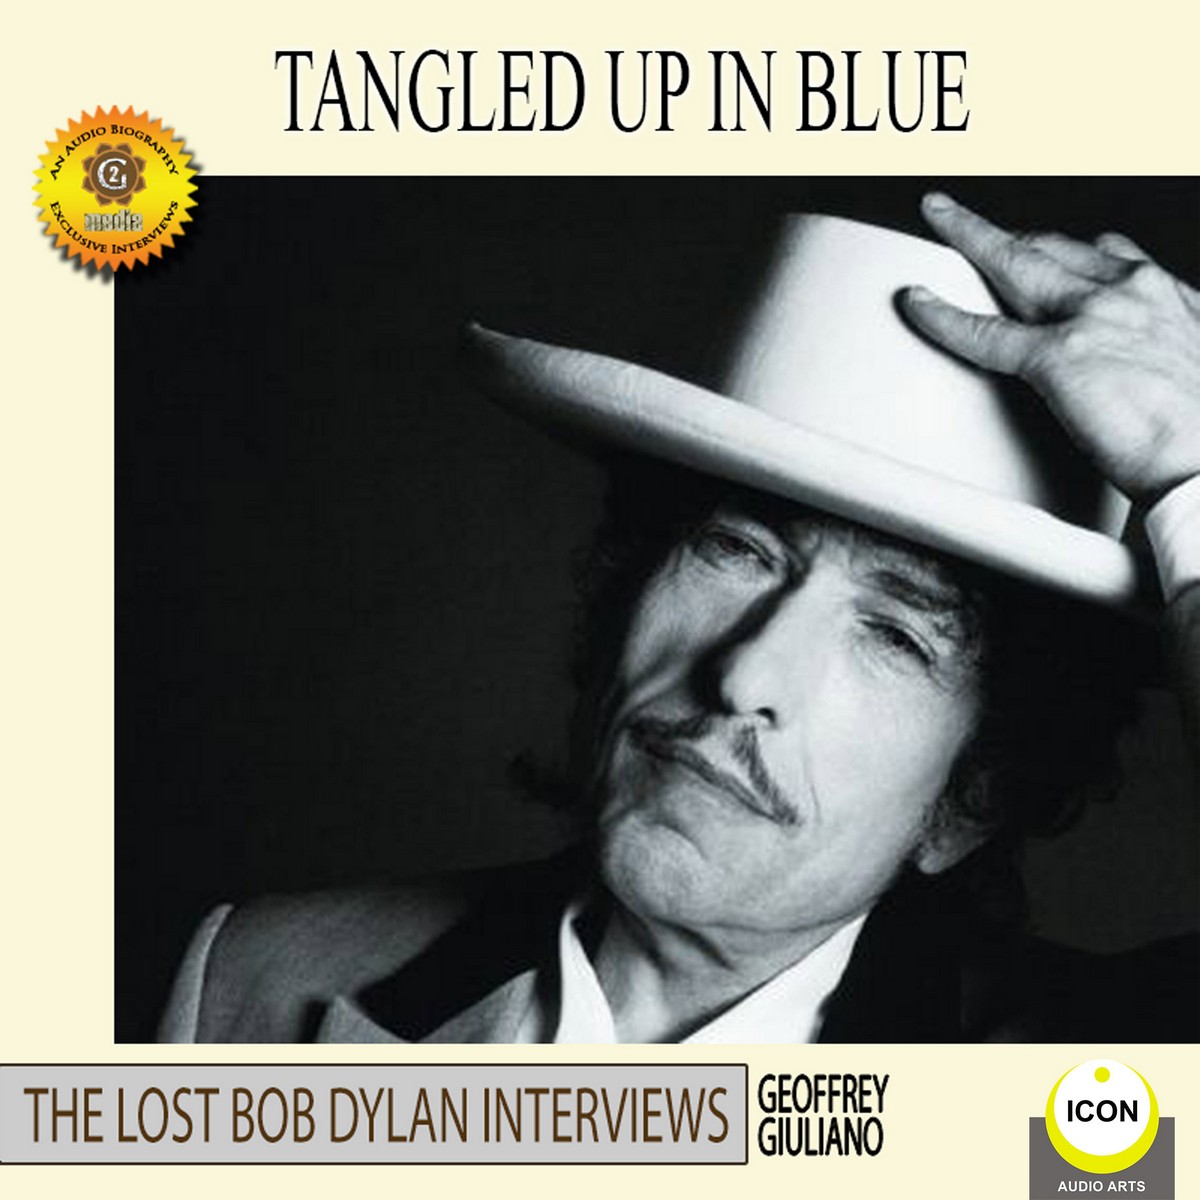 Tangled Up in Blue – The Lost Bob Dylan Interviews